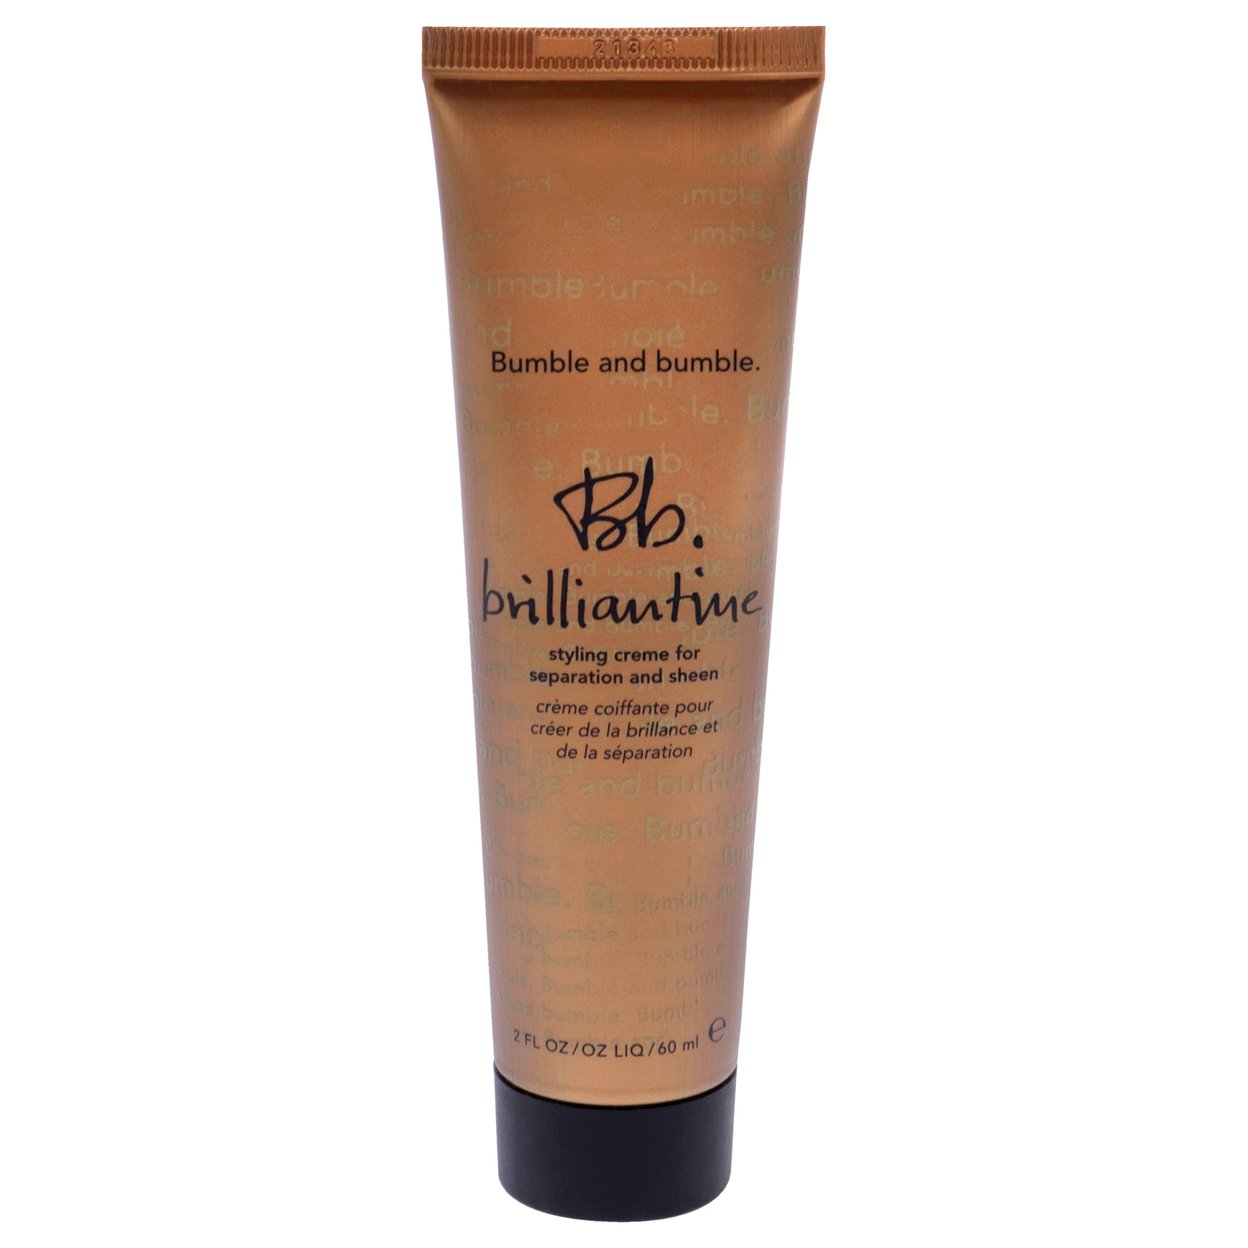 Bumble And Bumble Unisex HAIRCARE Brilliantine 2 Oz